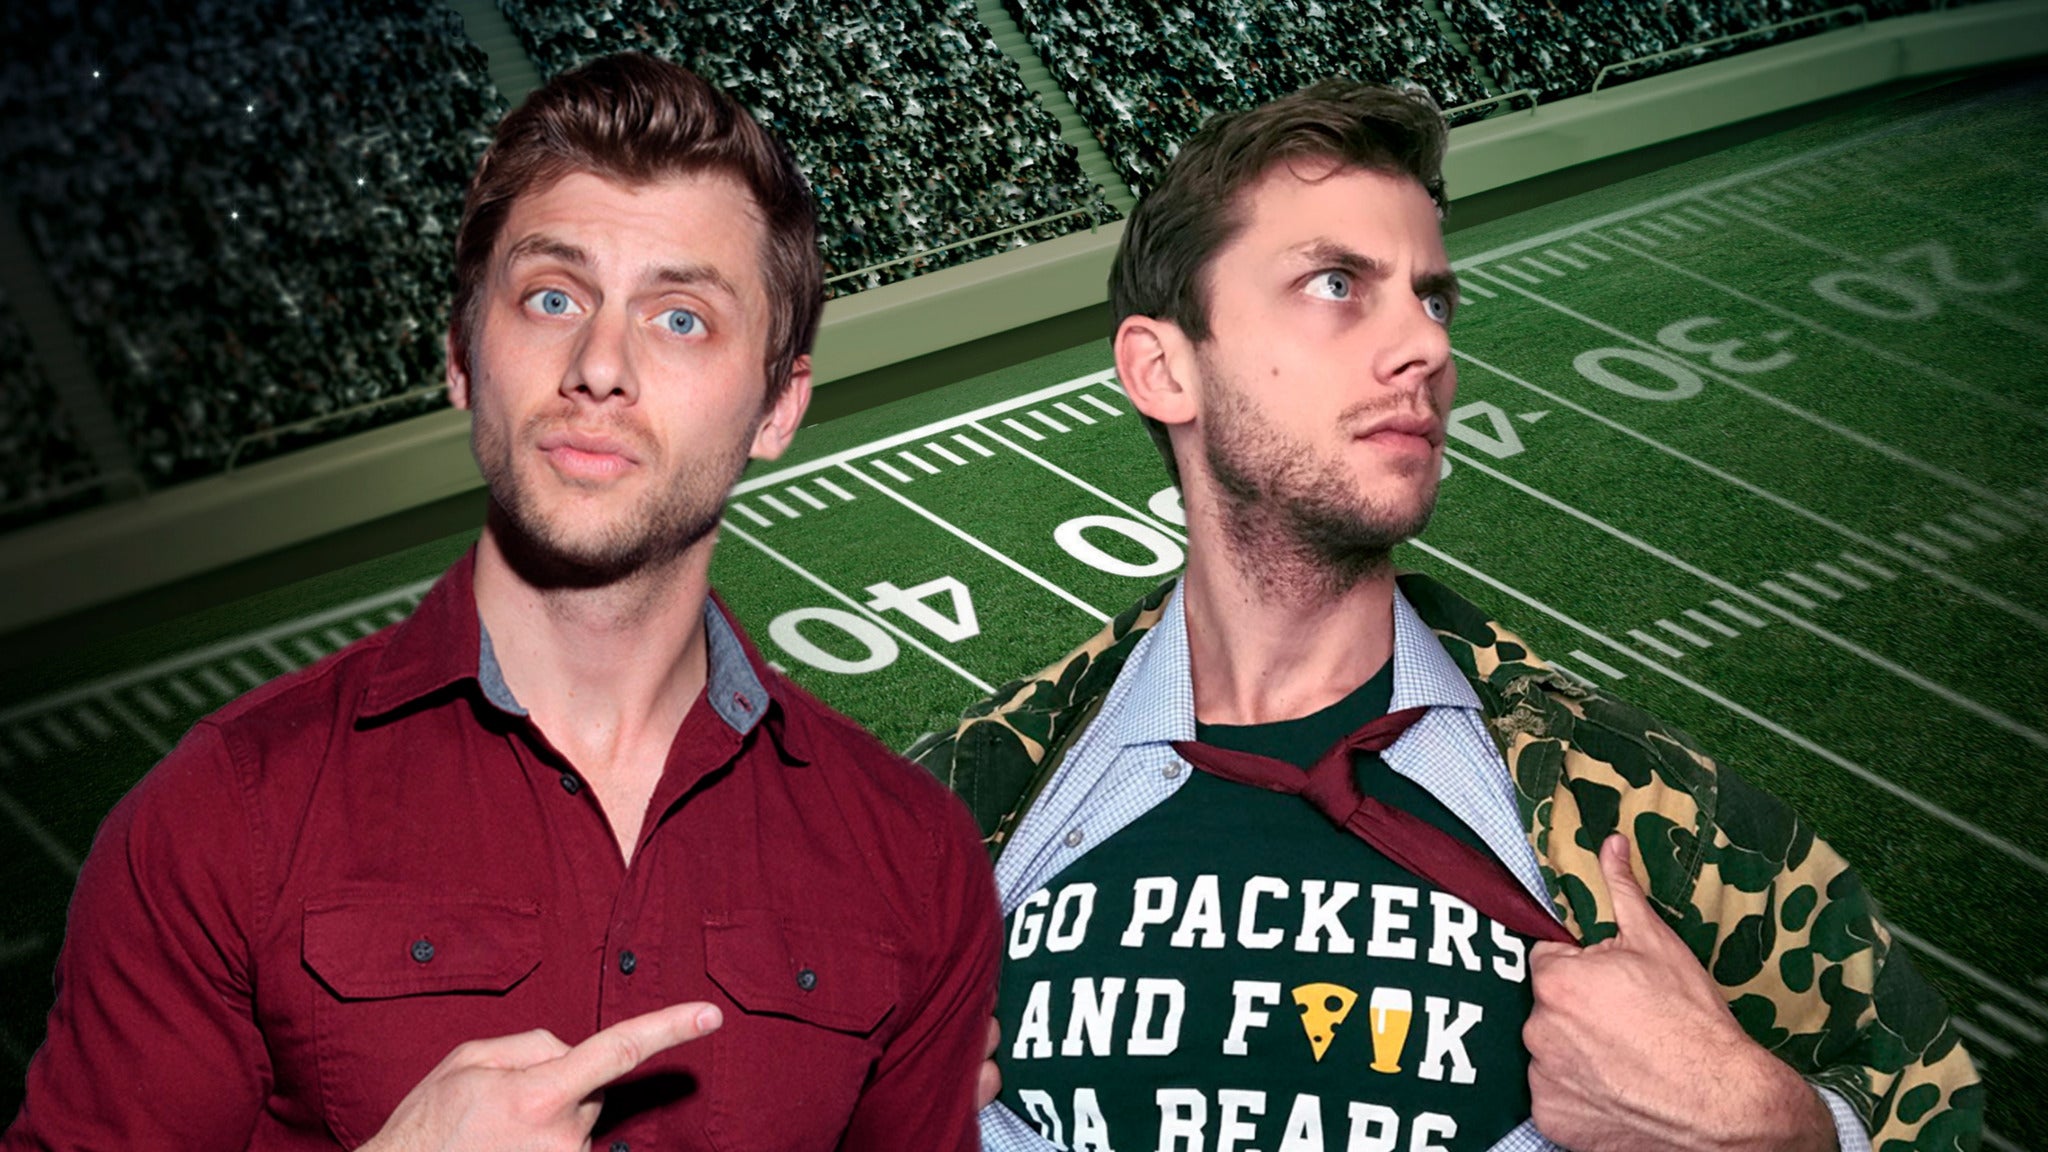 Charlie Berens in Cleveland promo photo for Exclusive presale offer code